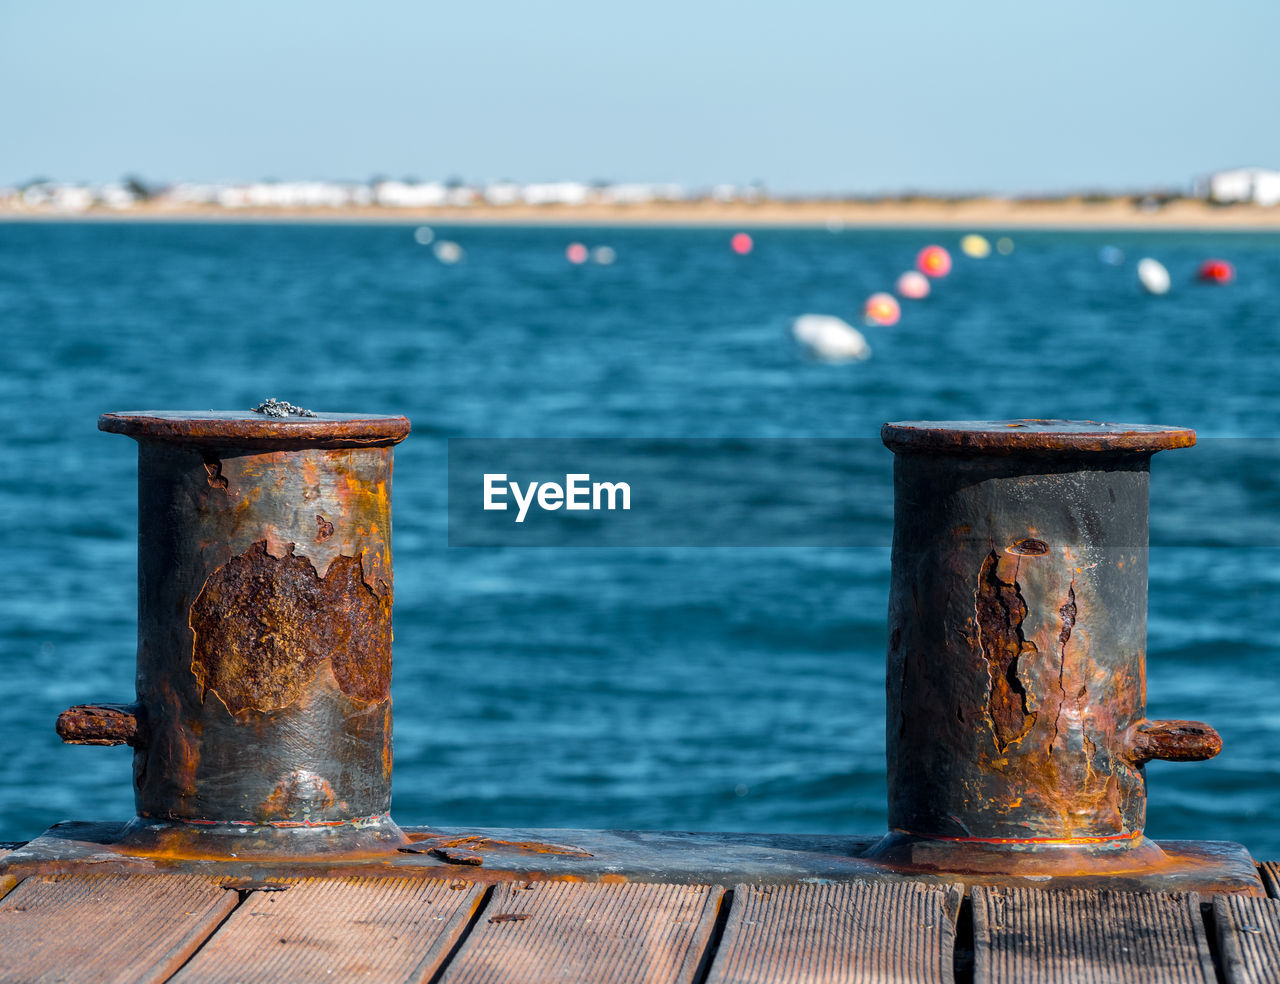 CLOSE-UP OF RUSTY RAILING AGAINST PIER